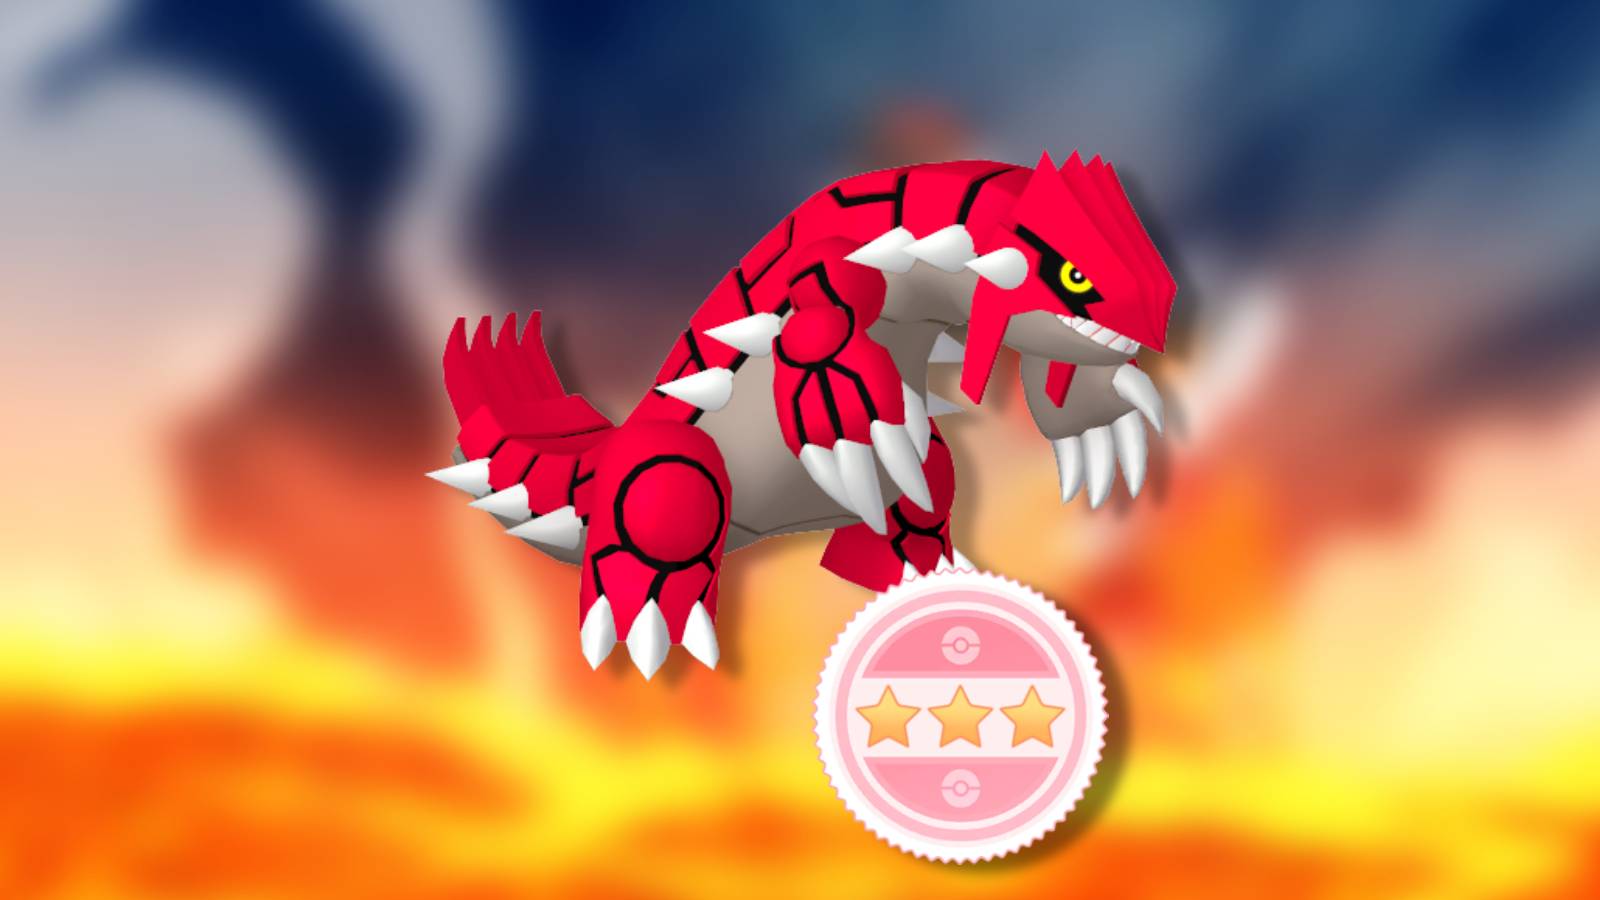 The Pokemon Groudon appears against a blurred background